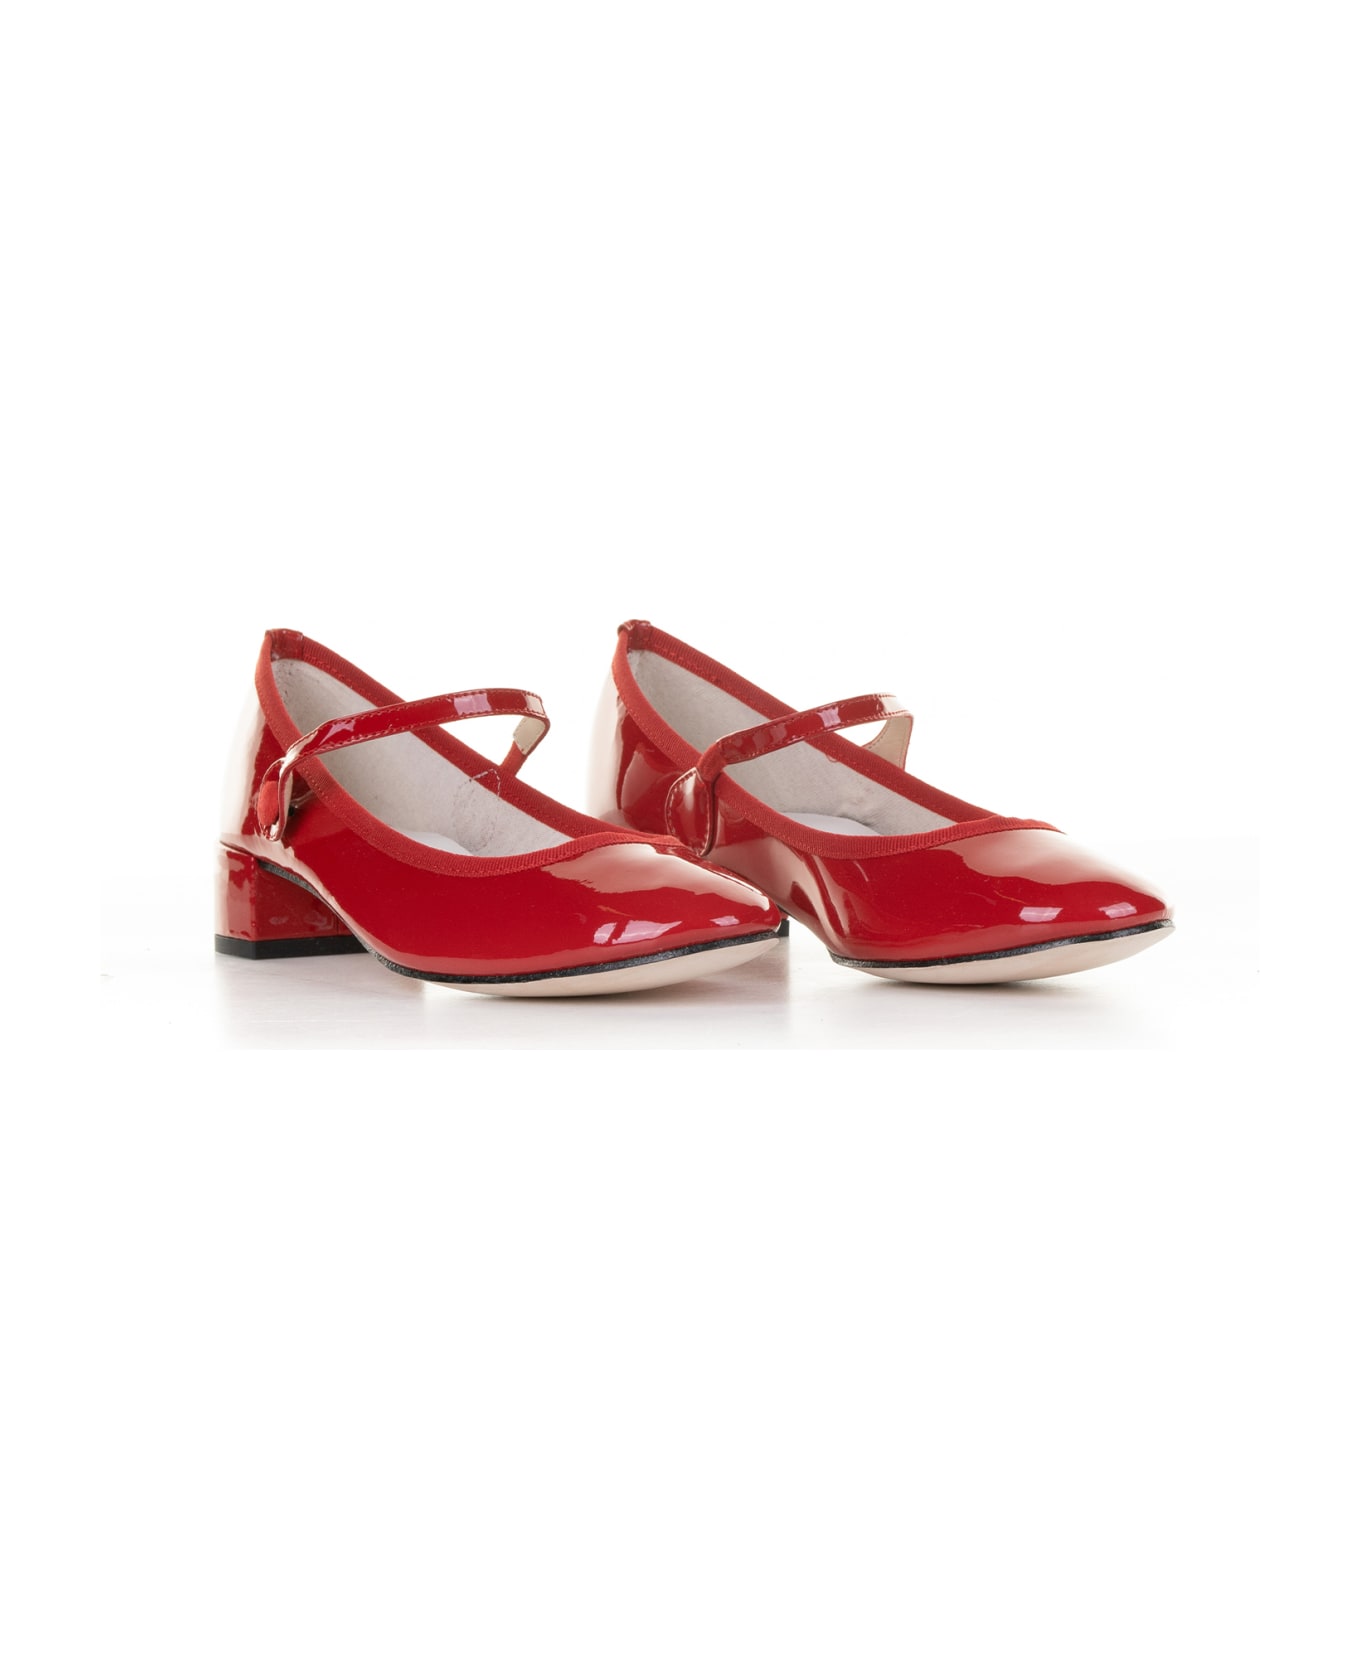 Repetto Ballerina In Shiny Leather With Strap - FLAMME ハイヒール